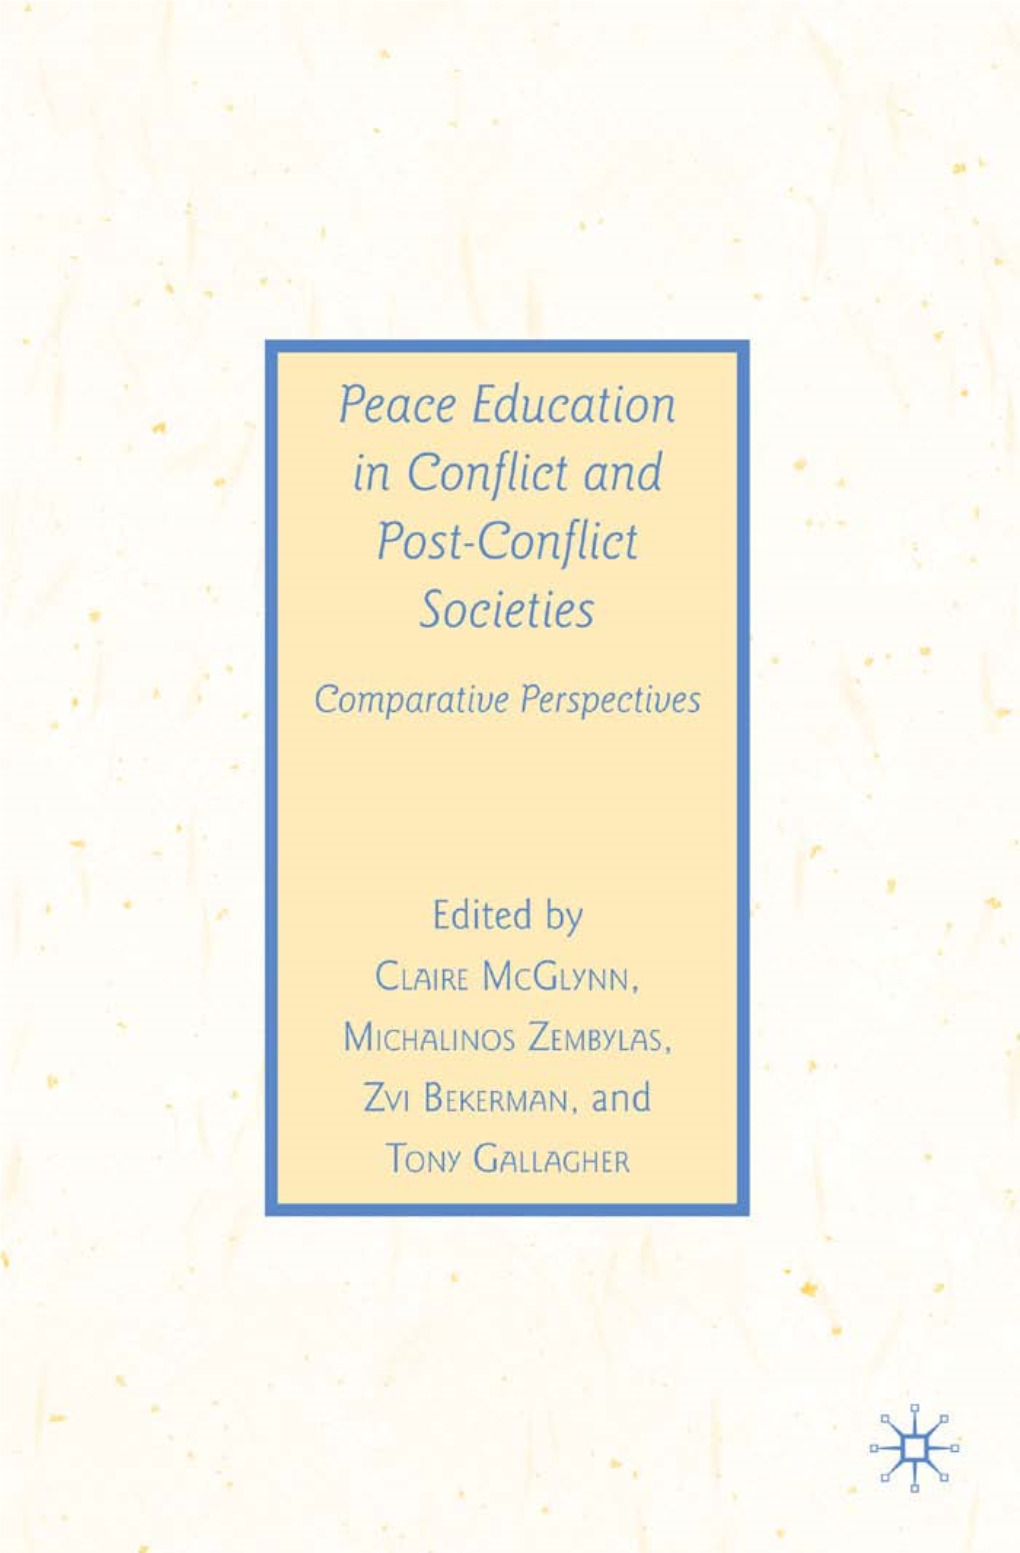 Approaches to Peace Education